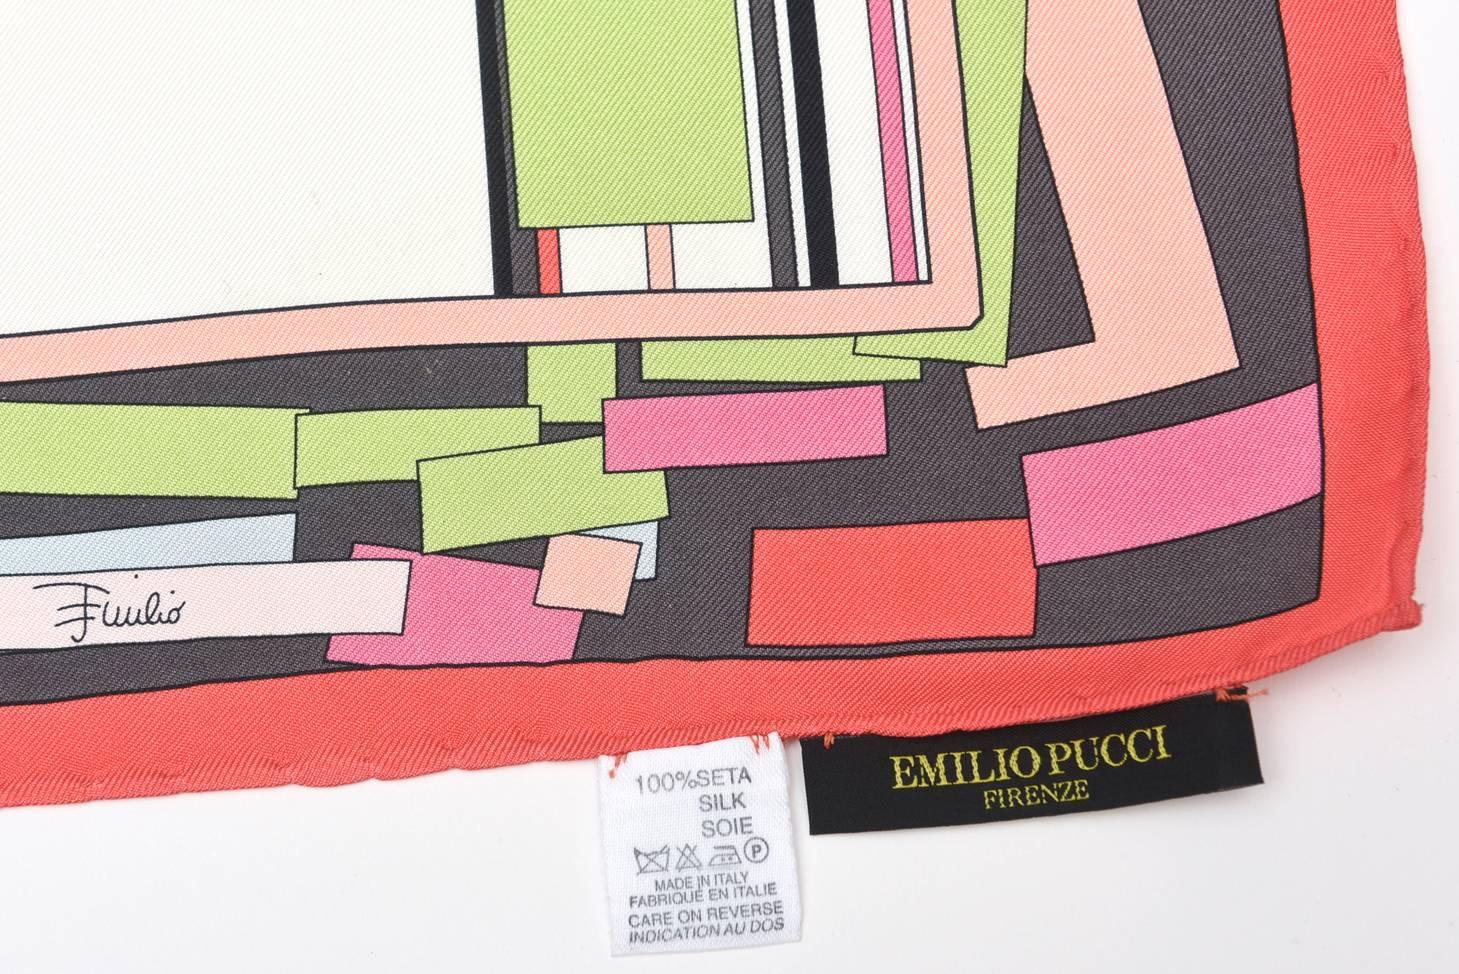  This beautiful luscious multi colored silk abstract Emilio Pucci scarf is from the 80's. Colors are shades of pinks, light greens, coral pink, black, white, light blue.
